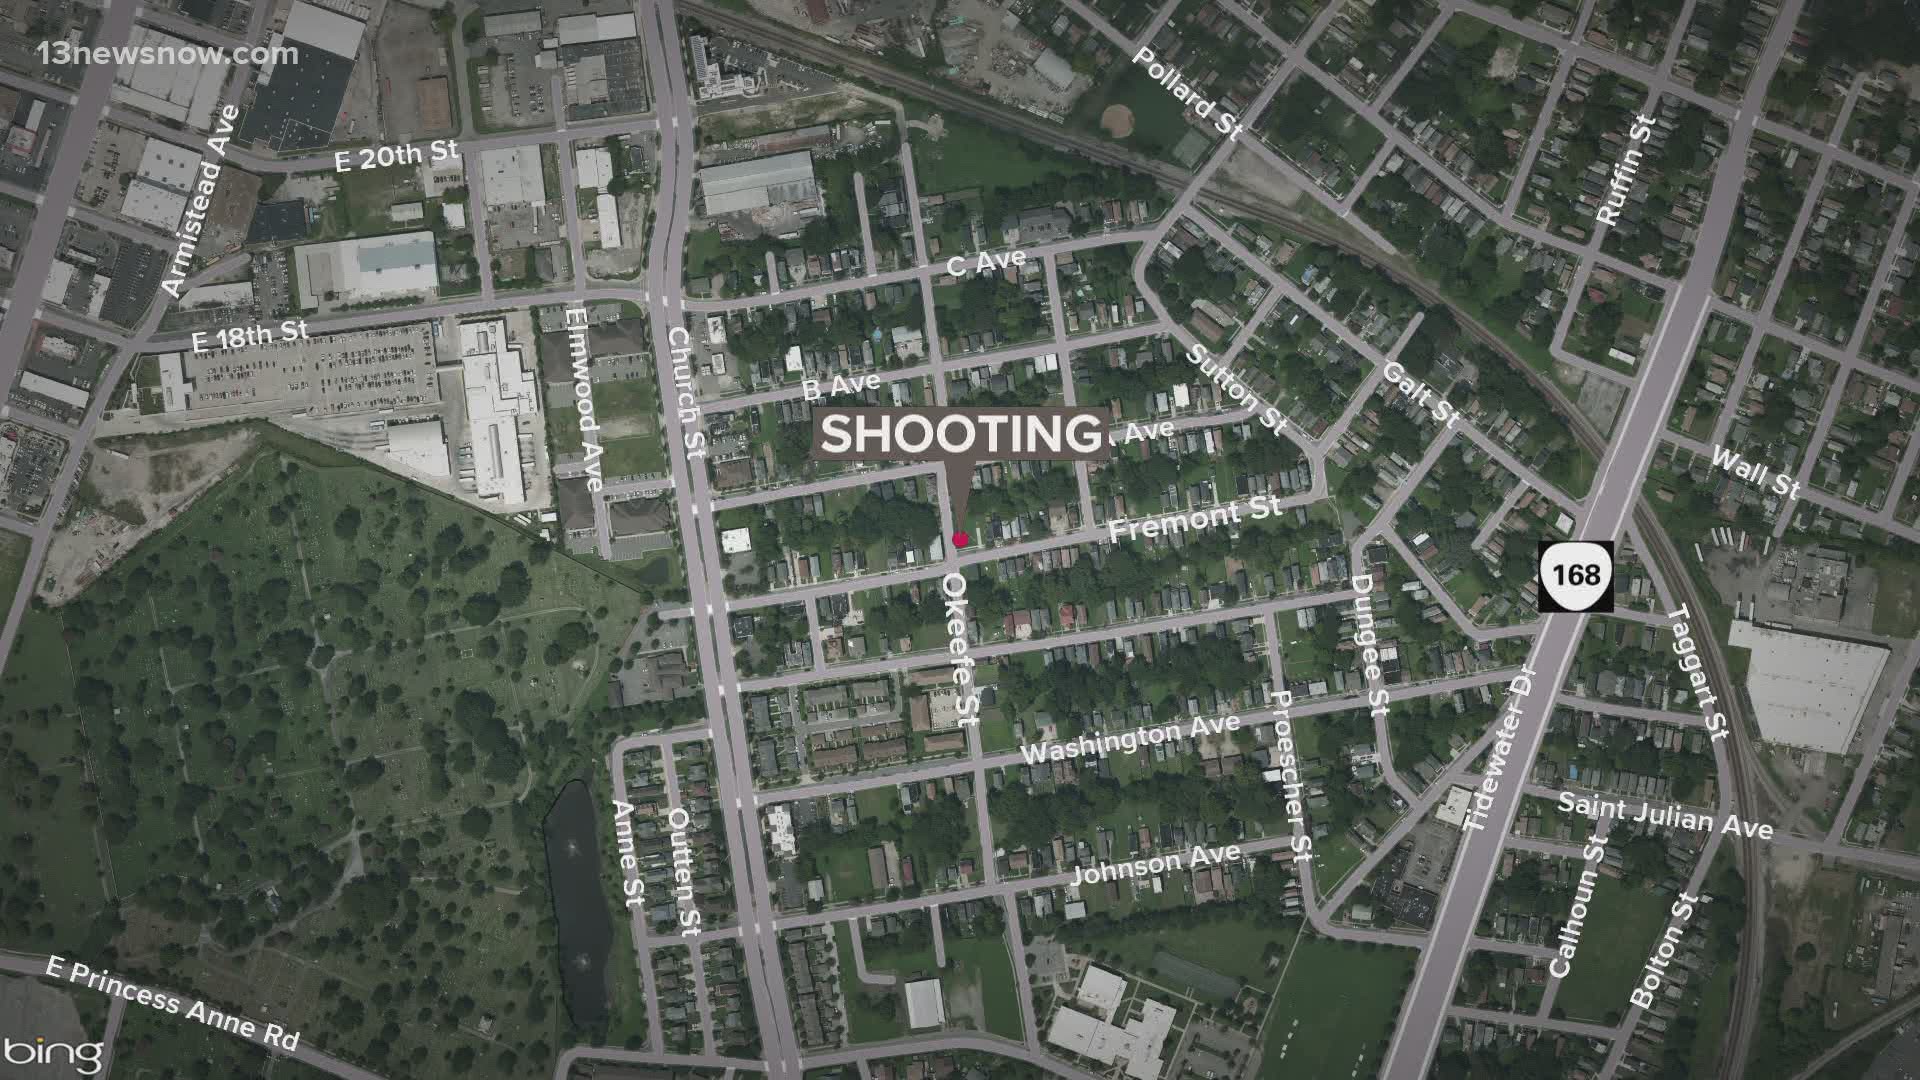 Norfolk police are seeking answers after a shooting happened in the 800 block of Fremont Street Sunday, leaving an individual seriously hurt.